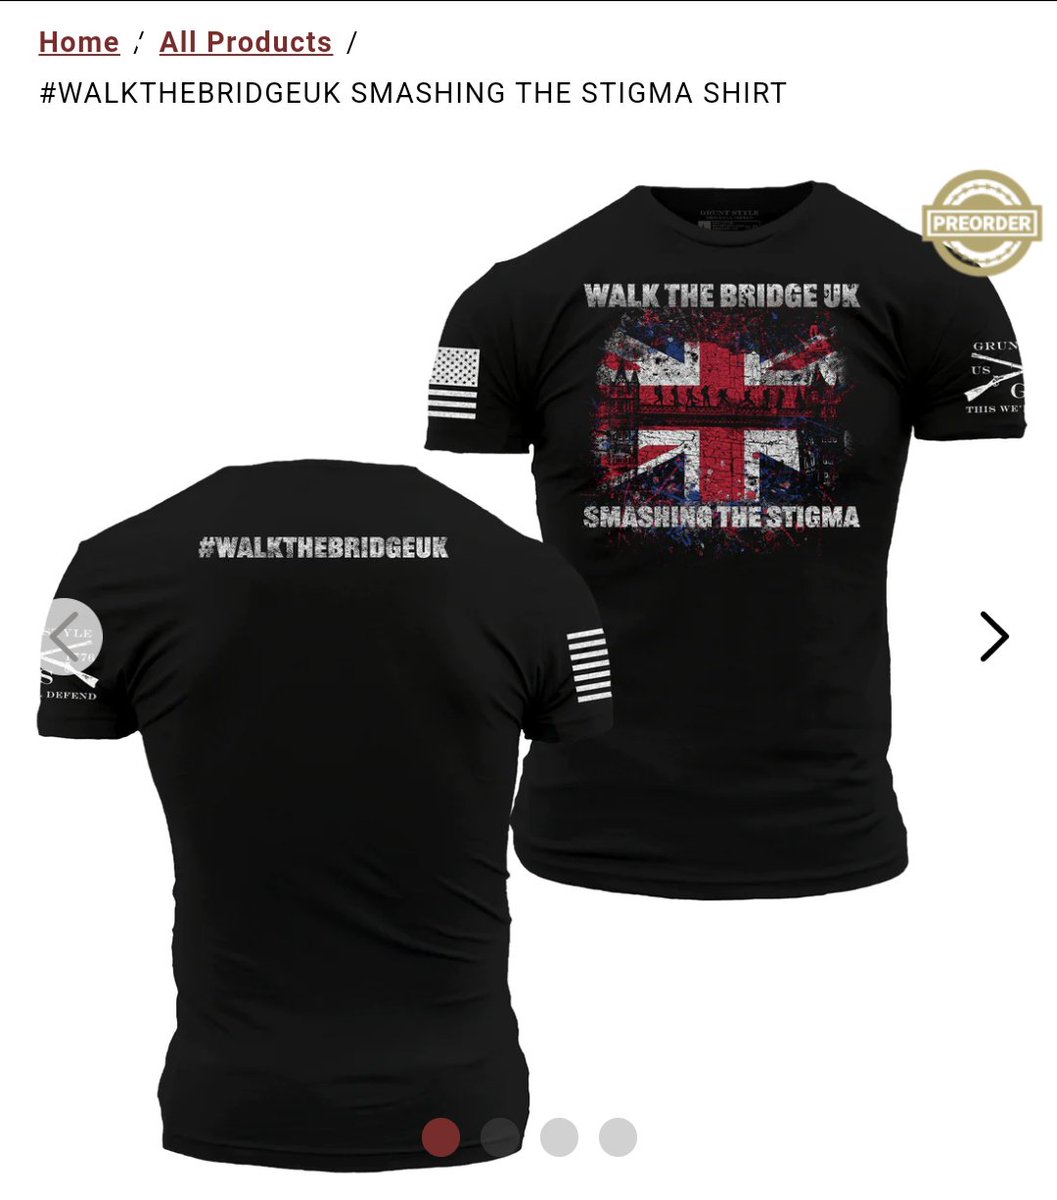 Let's start May stronger than ever with @Gruntstyle. 2 DAYS LEFT. It's #mentalhealthawareness Month and we're supporting our #veterans and #firstresponders here and across the pond. GRAB YOUR #WalktheBridge-UK gear at walkthebridge.org.
#youarenotalone 
#smashingthestigma